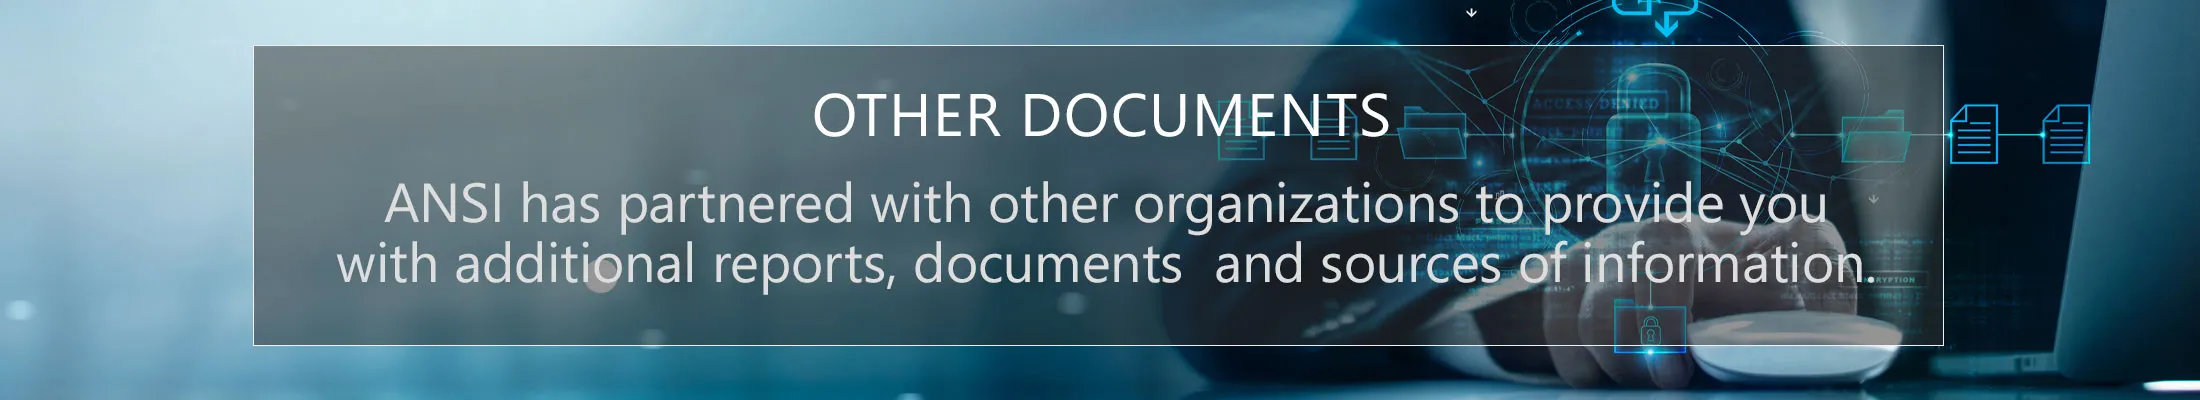 Other documents